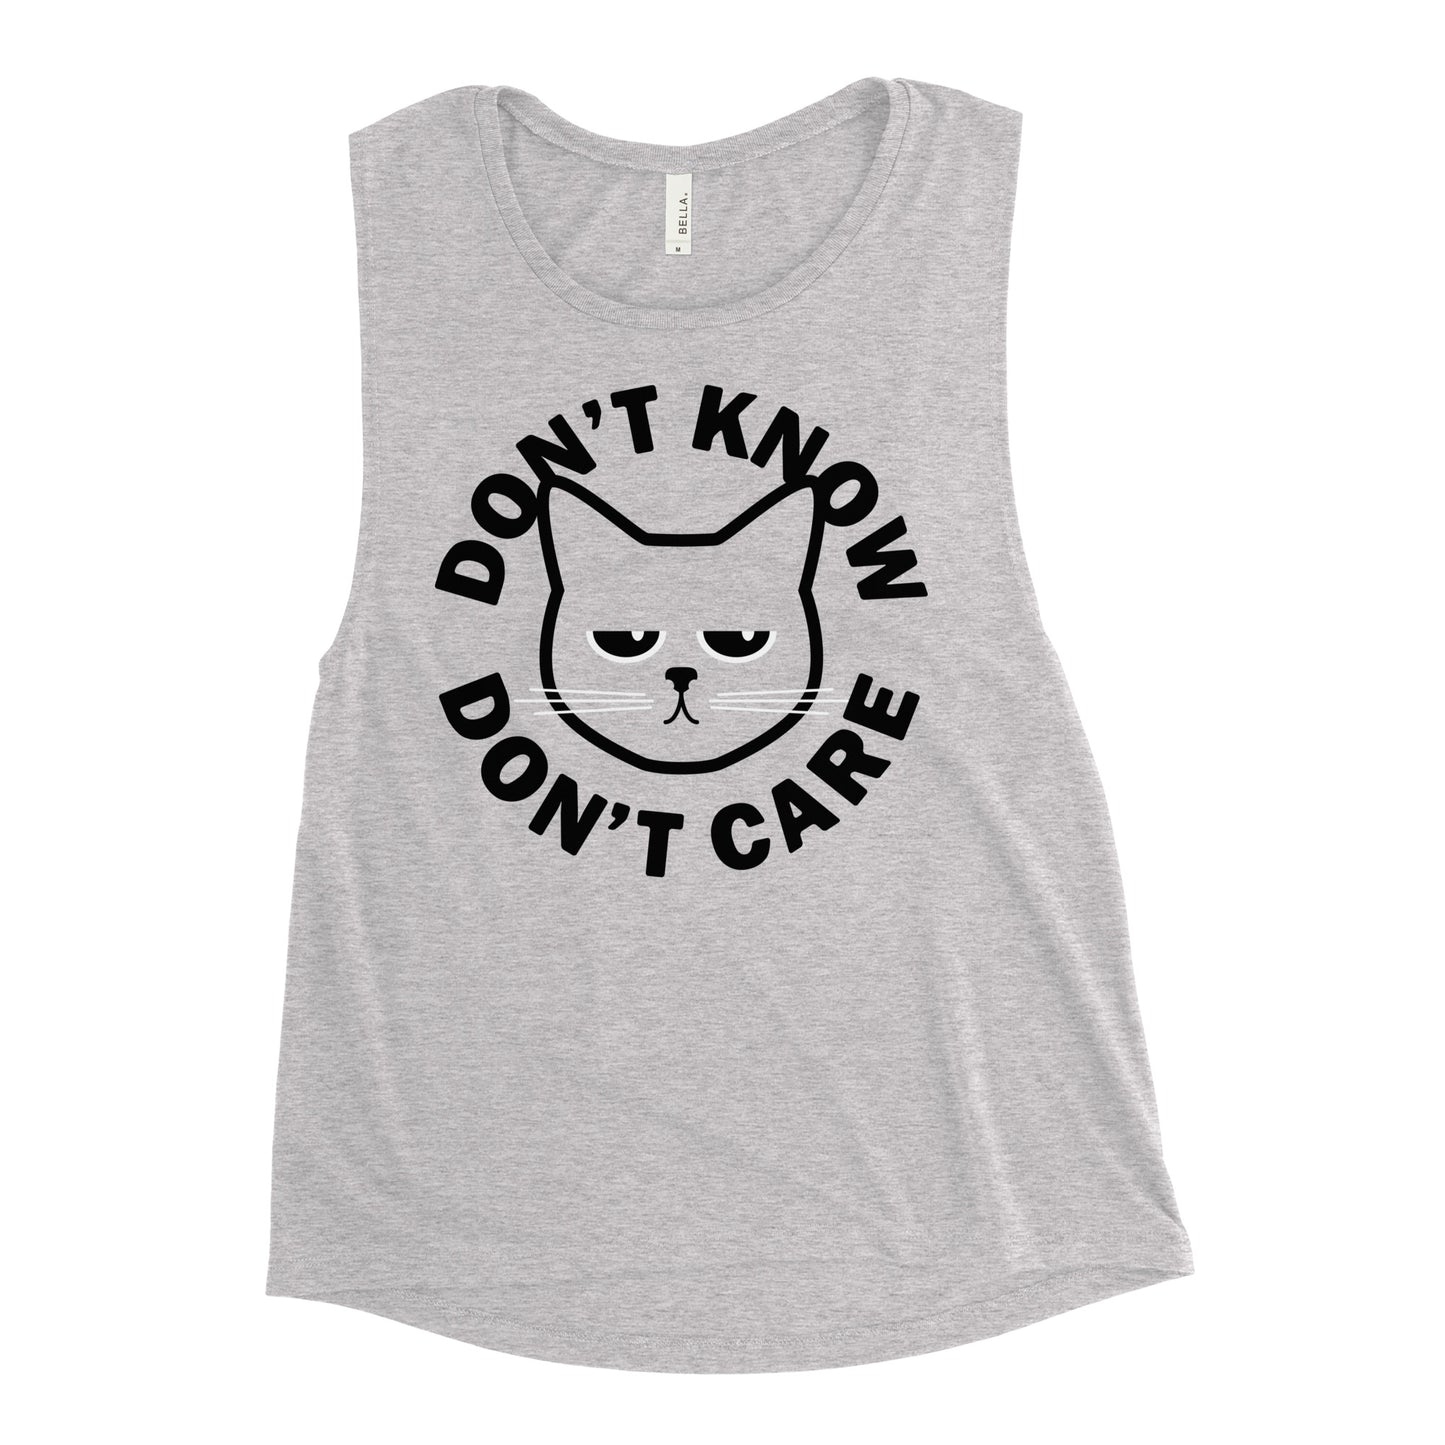 Don't Know Don't Care Women's Muscle Tank